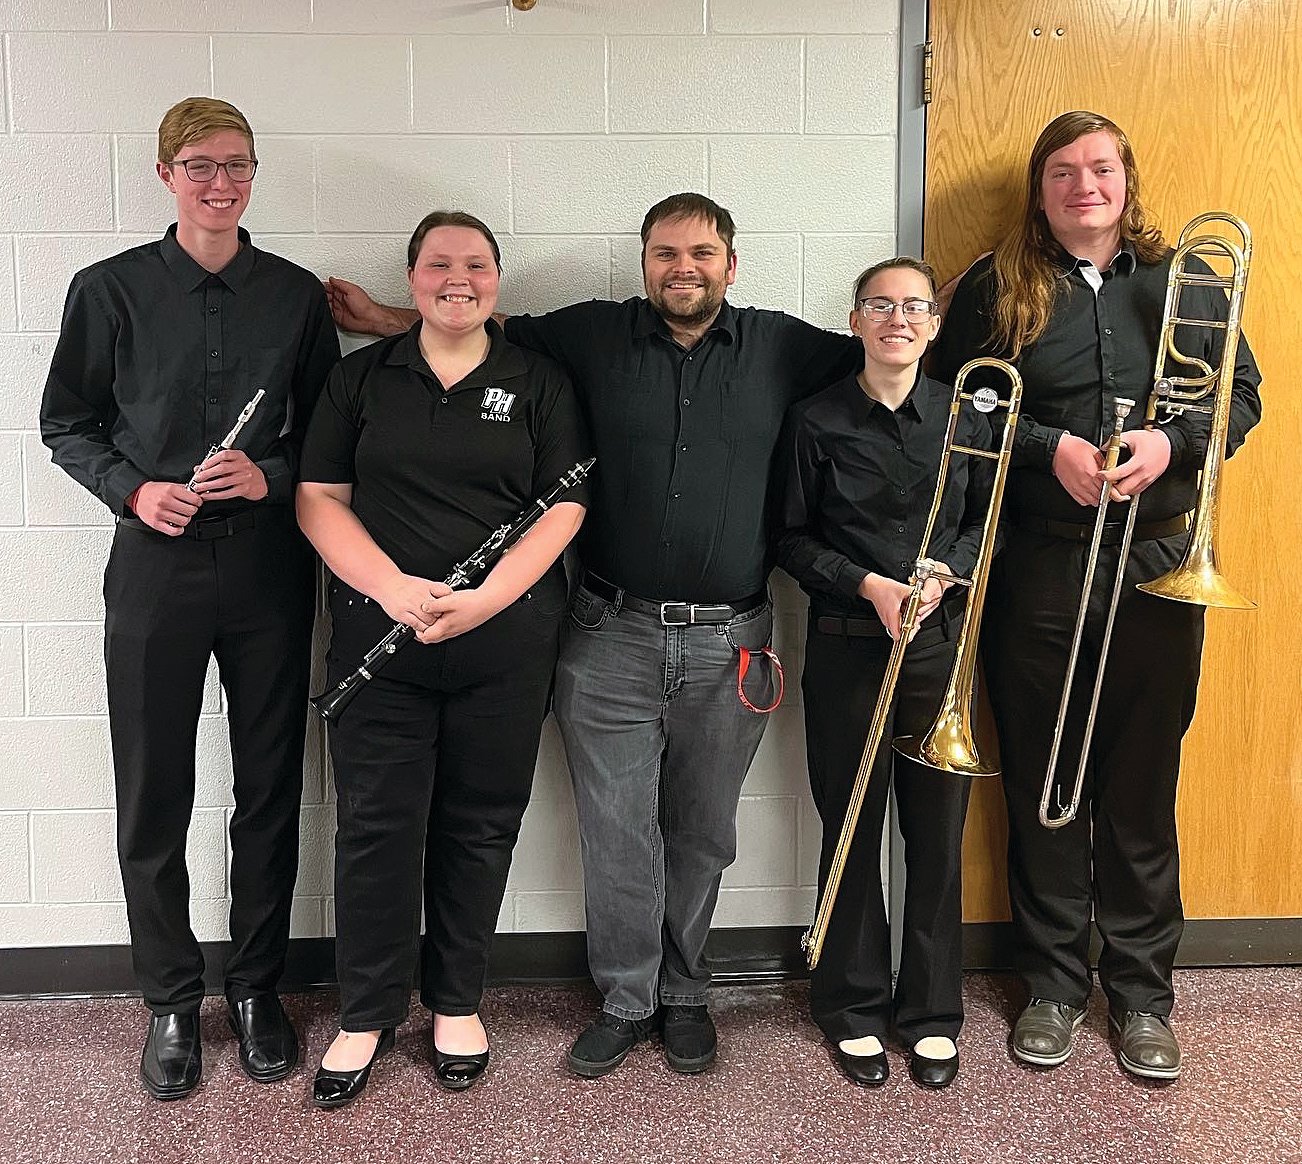 Four Parke Heritage High School musicians participated in the annual Indiana Bandmasters Association All-District Band hosted at Northview High School on Nov. 19-20. Performing were Treyton Burgess, piccolo; Ashlyn Hybarger, clarinet; and Alison Nicholas and Aidan Gillooly, trombones. They joined the 90 students from 15 area schools to perform a concert on Sunday afternoon. On Saturday, the group rehearsed for over six hours to prepare for the concert. Guest conductor for the event was Dr. Stephen L. Gage who is serving as the Interim Director of Bands in the Indiana State University School of Music. The All District Band provides an opportunity for high school musicians to perform with other young musicians and work with highly respected music educators and conductors. The PHHS band director is Alec Moeller. Pictured are Treyton Burgess, Ashlyn Hybarger, PHHS band director Alec Moeller, Alison Nicholas and Aidan Gillooly.